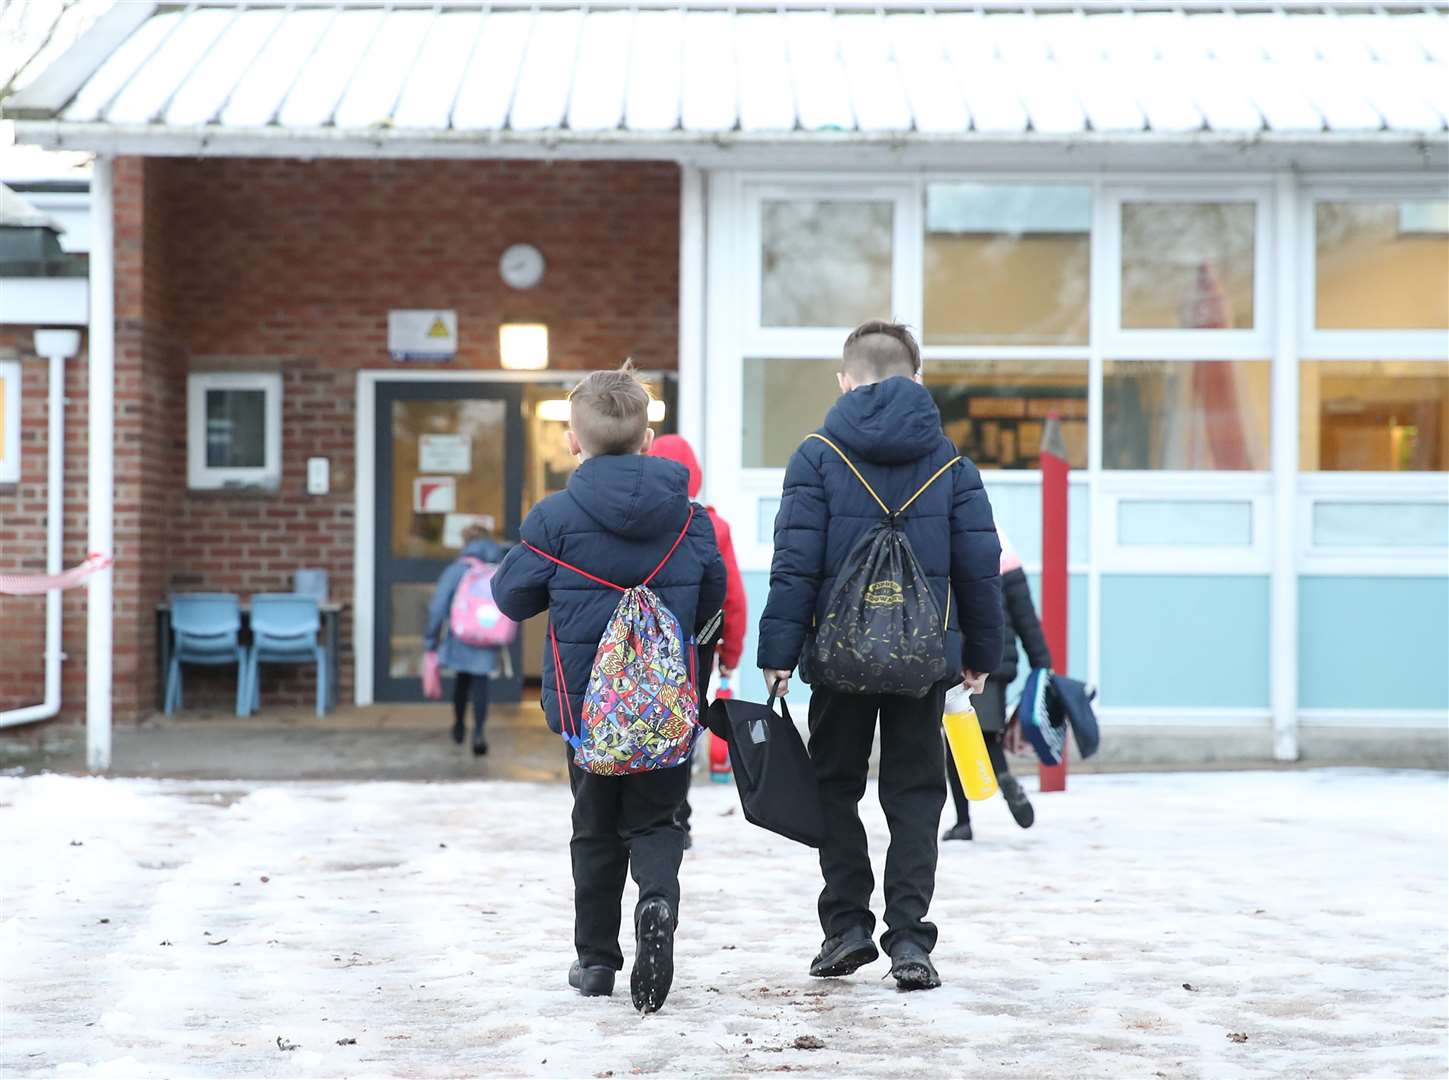 The Department for Education said children with at least one parent or carer who was a critical worker could attend onsite (Martin Rickett/PA)